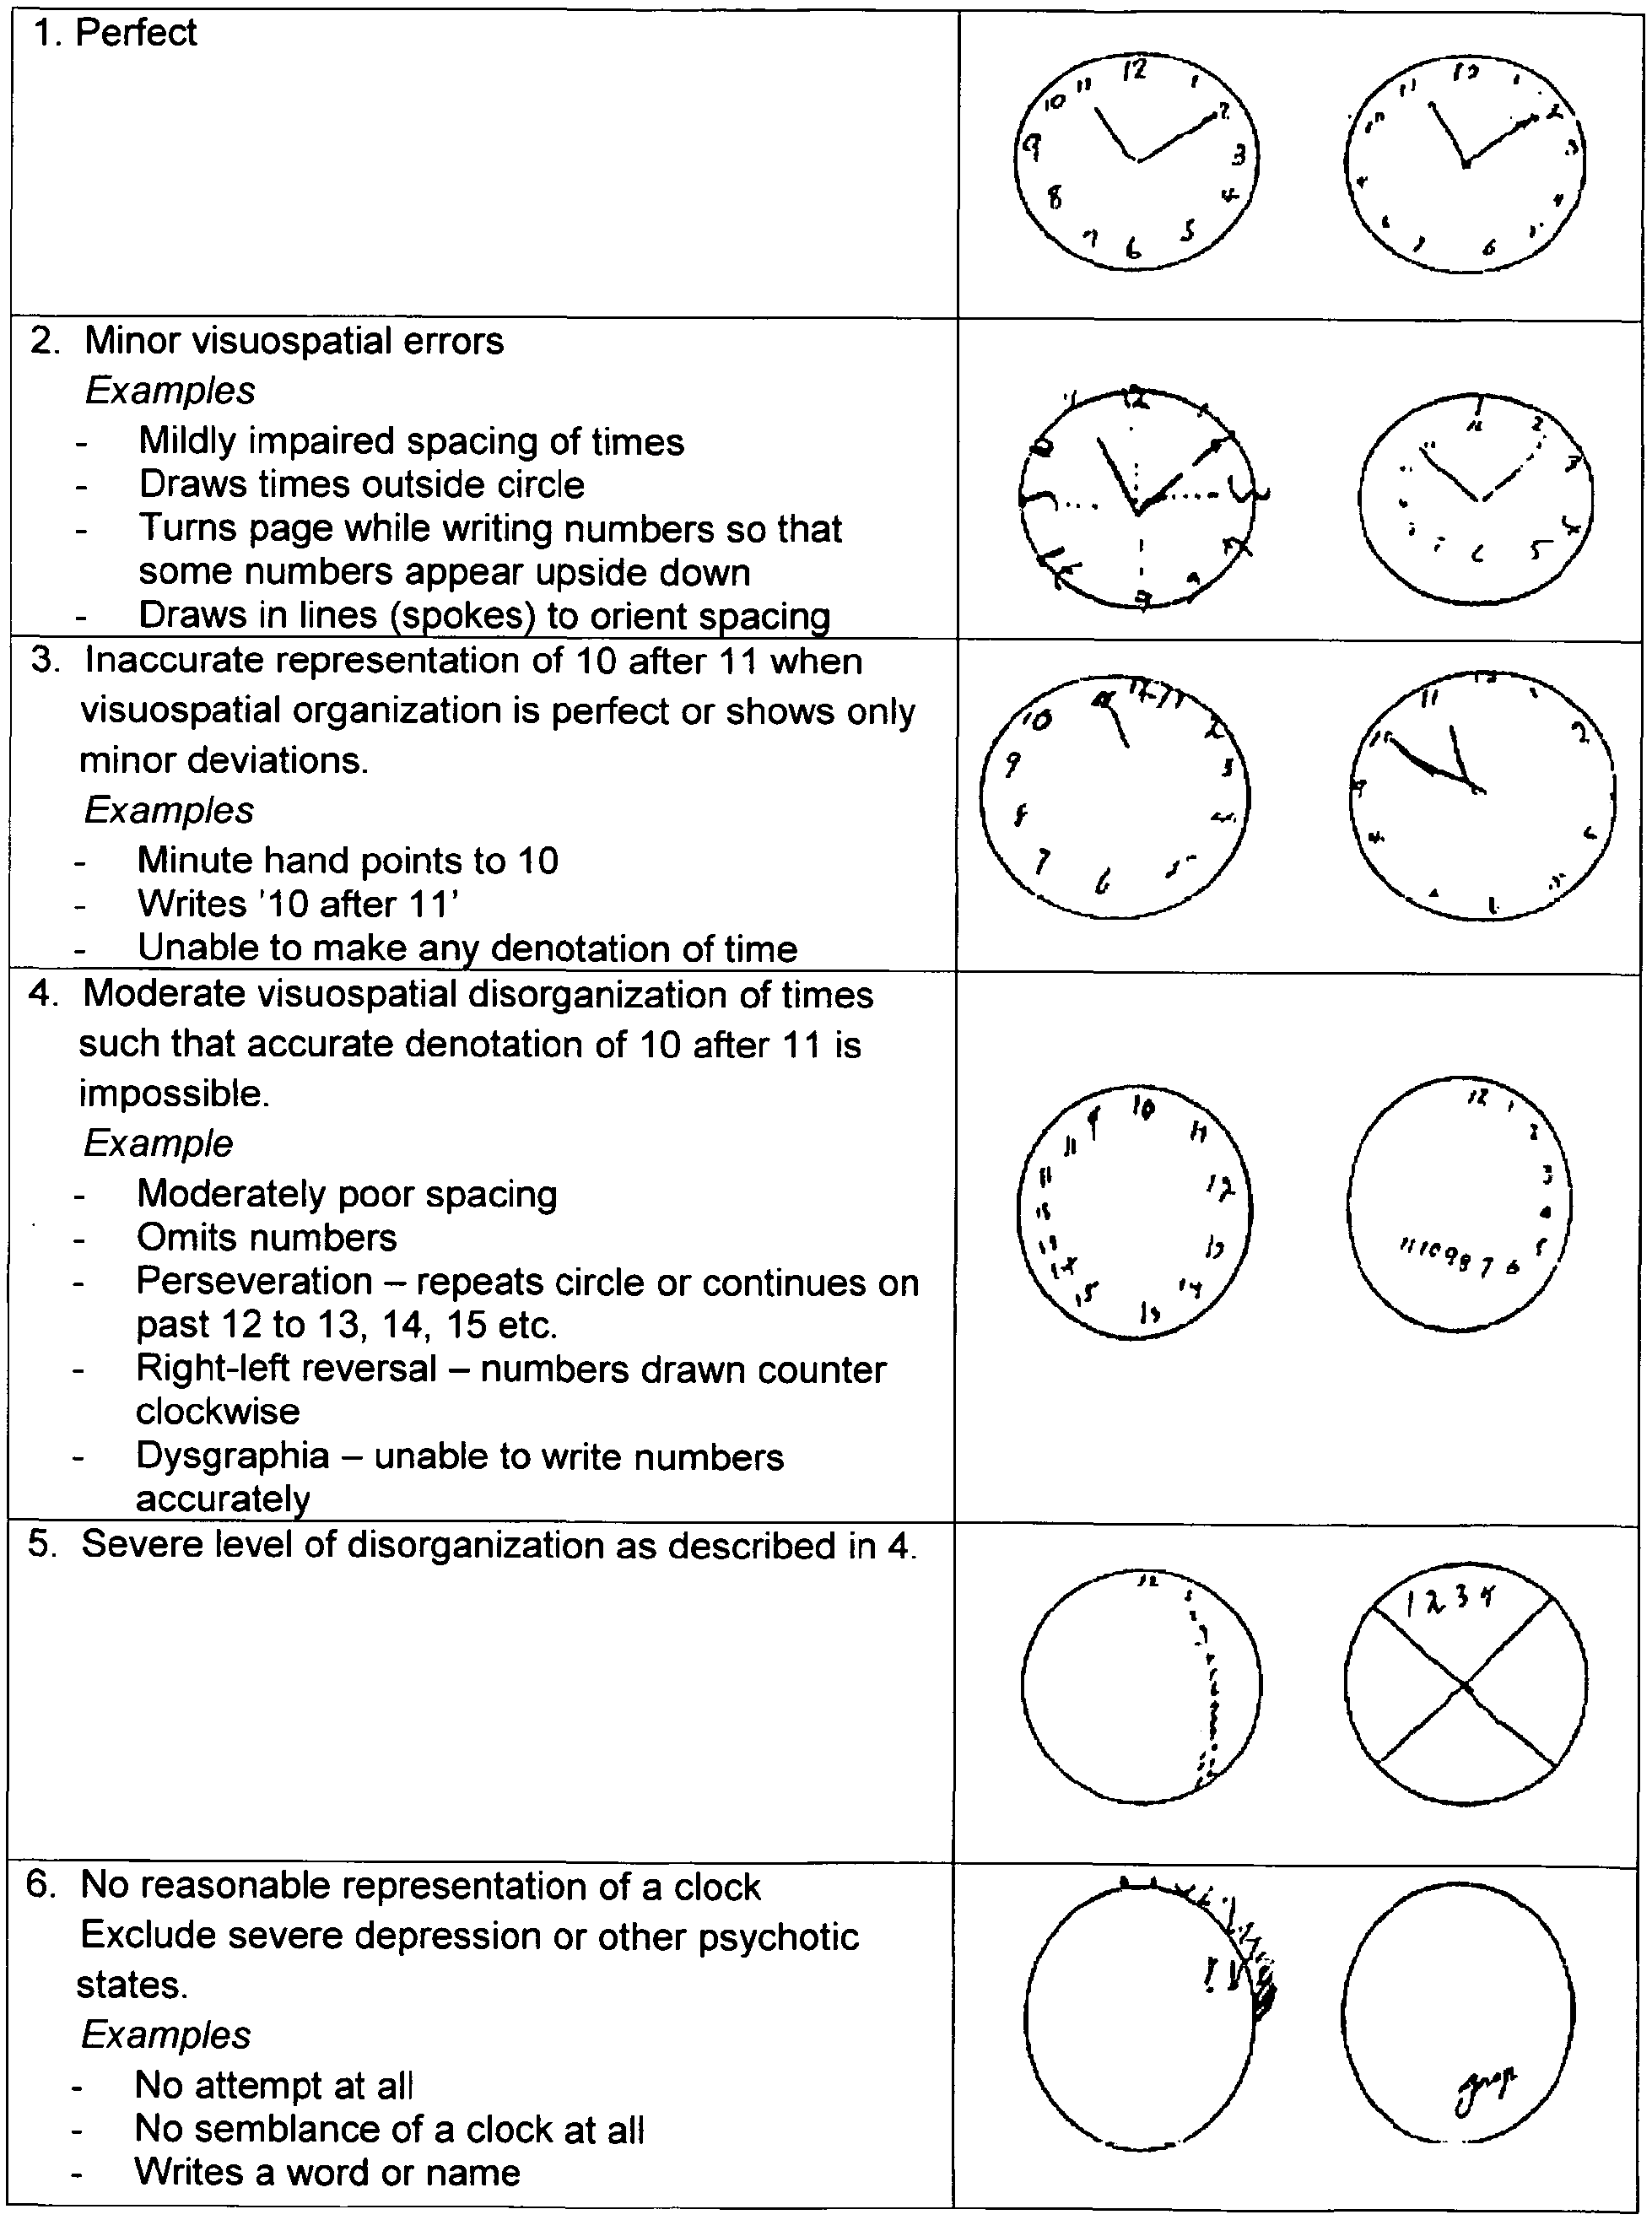 The Clock Drawing Test and Dementia